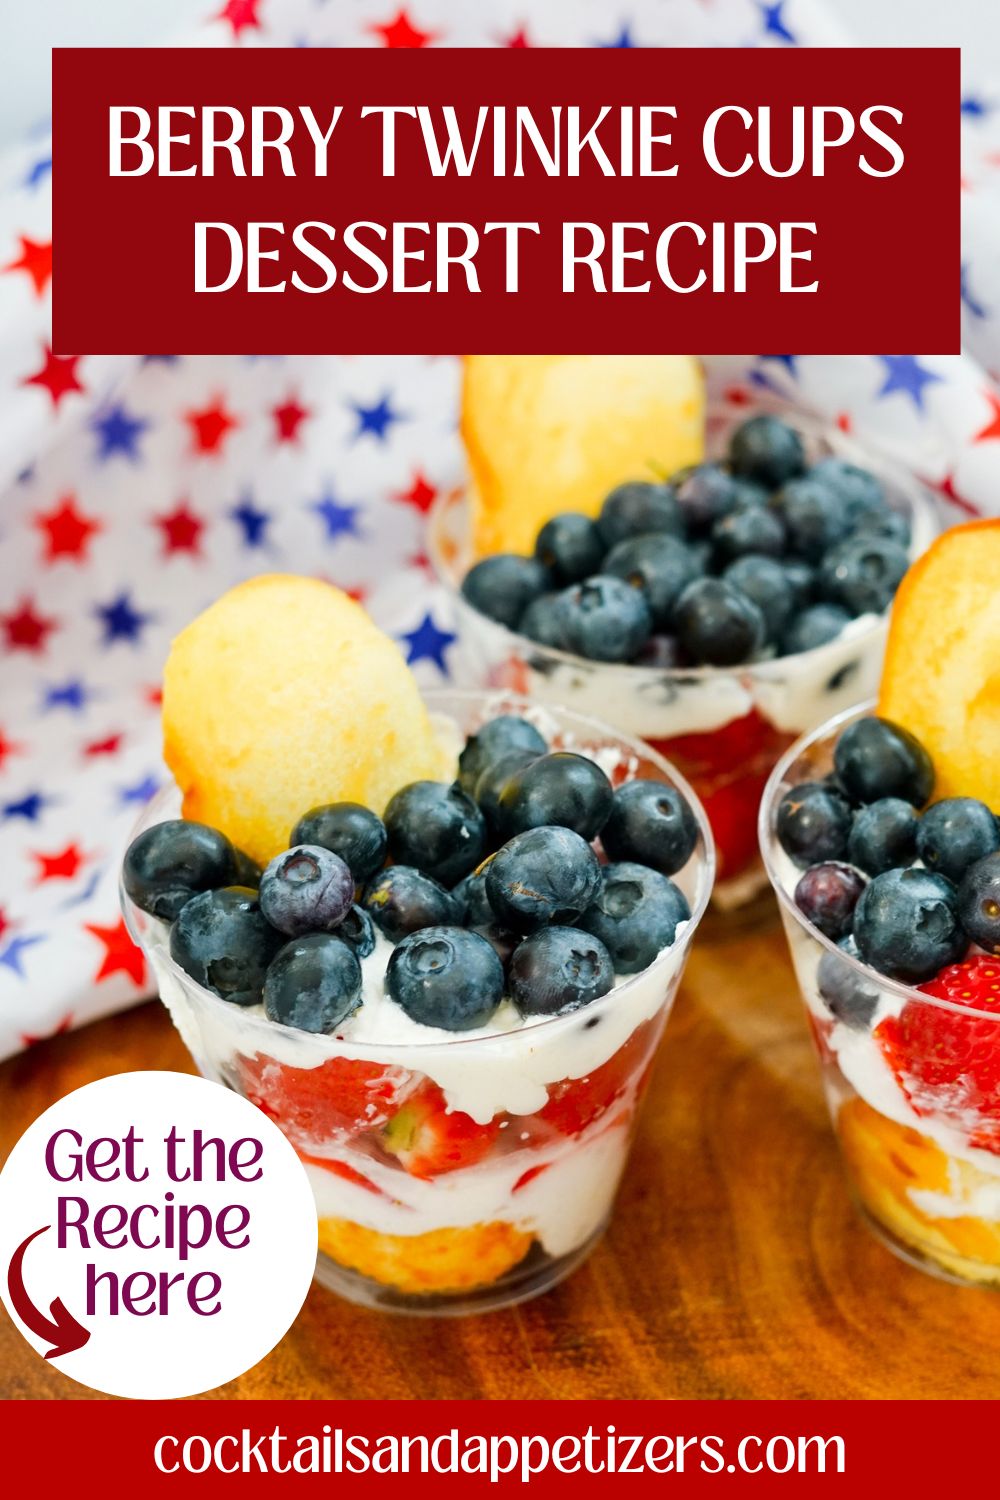 Fruity Twinkie Cake dessert cups with strawberries and blueberries with whipped cream.